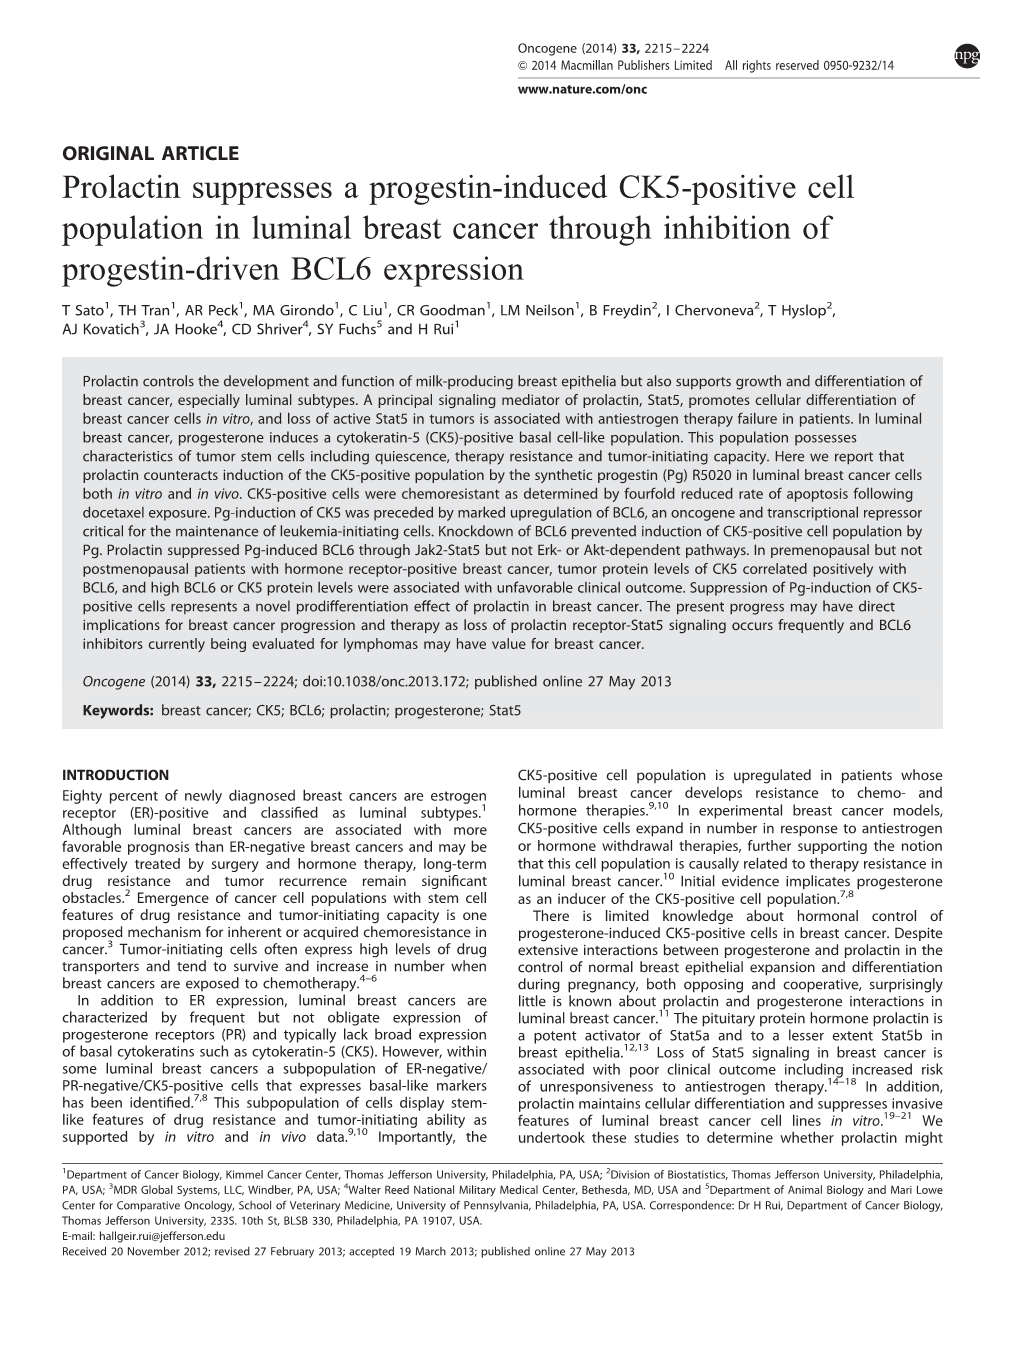 Prolactin Suppresses a Progestin-Induced CK5-Positive Cell Population in Luminal Breast Cancer Through Inhibition of Progestin-Driven BCL6 Expression